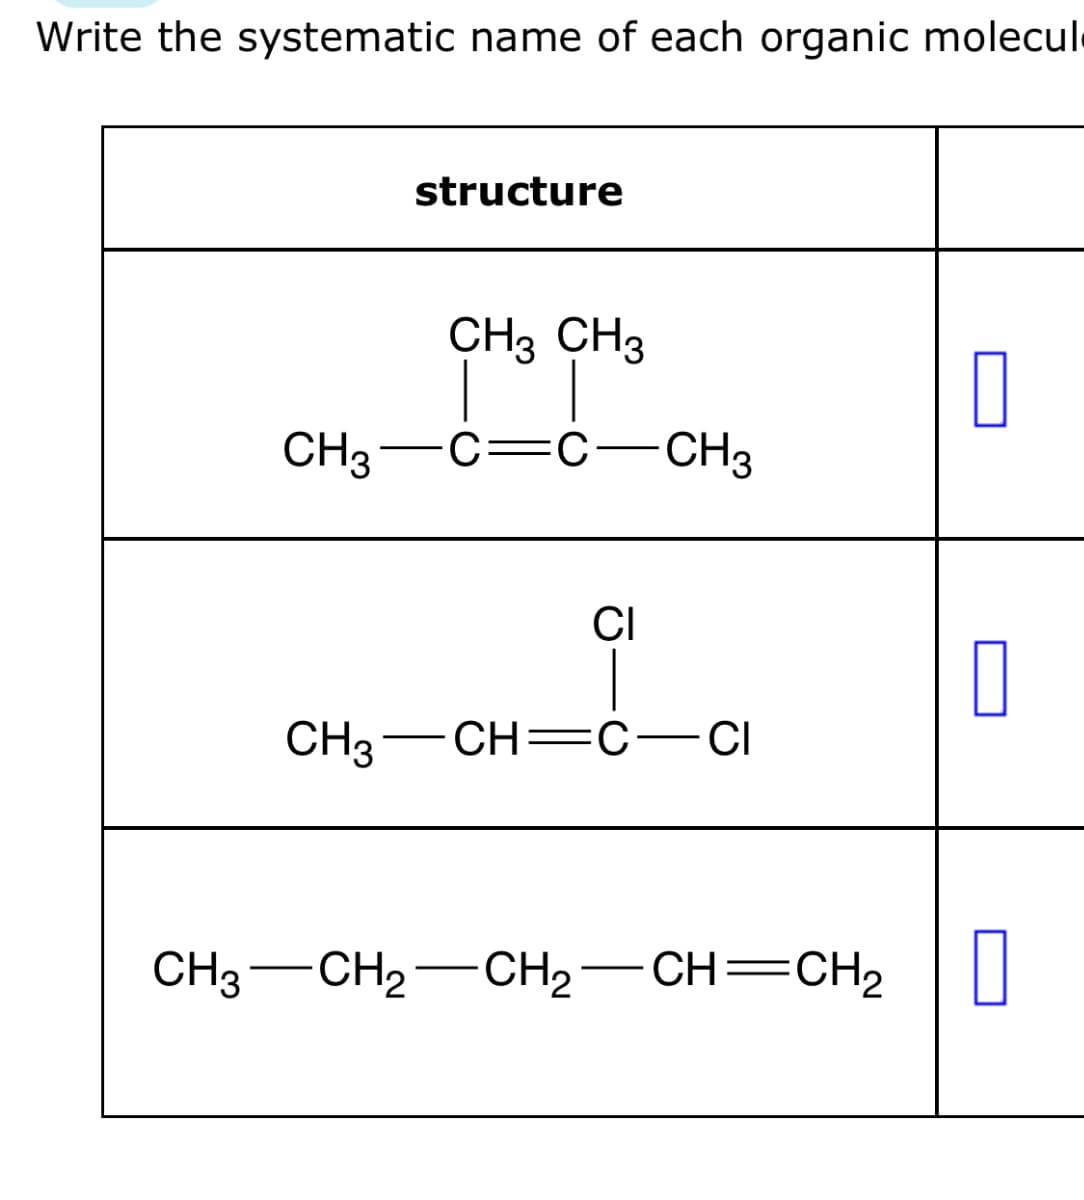 Write the systematic name of each organic molecul
structure
CH 3 CH 3
C=C-CH3
CH3-C=C
CI
CH3 CH=C CI
CH3-CH2-CH2-CH=CH2 ☐